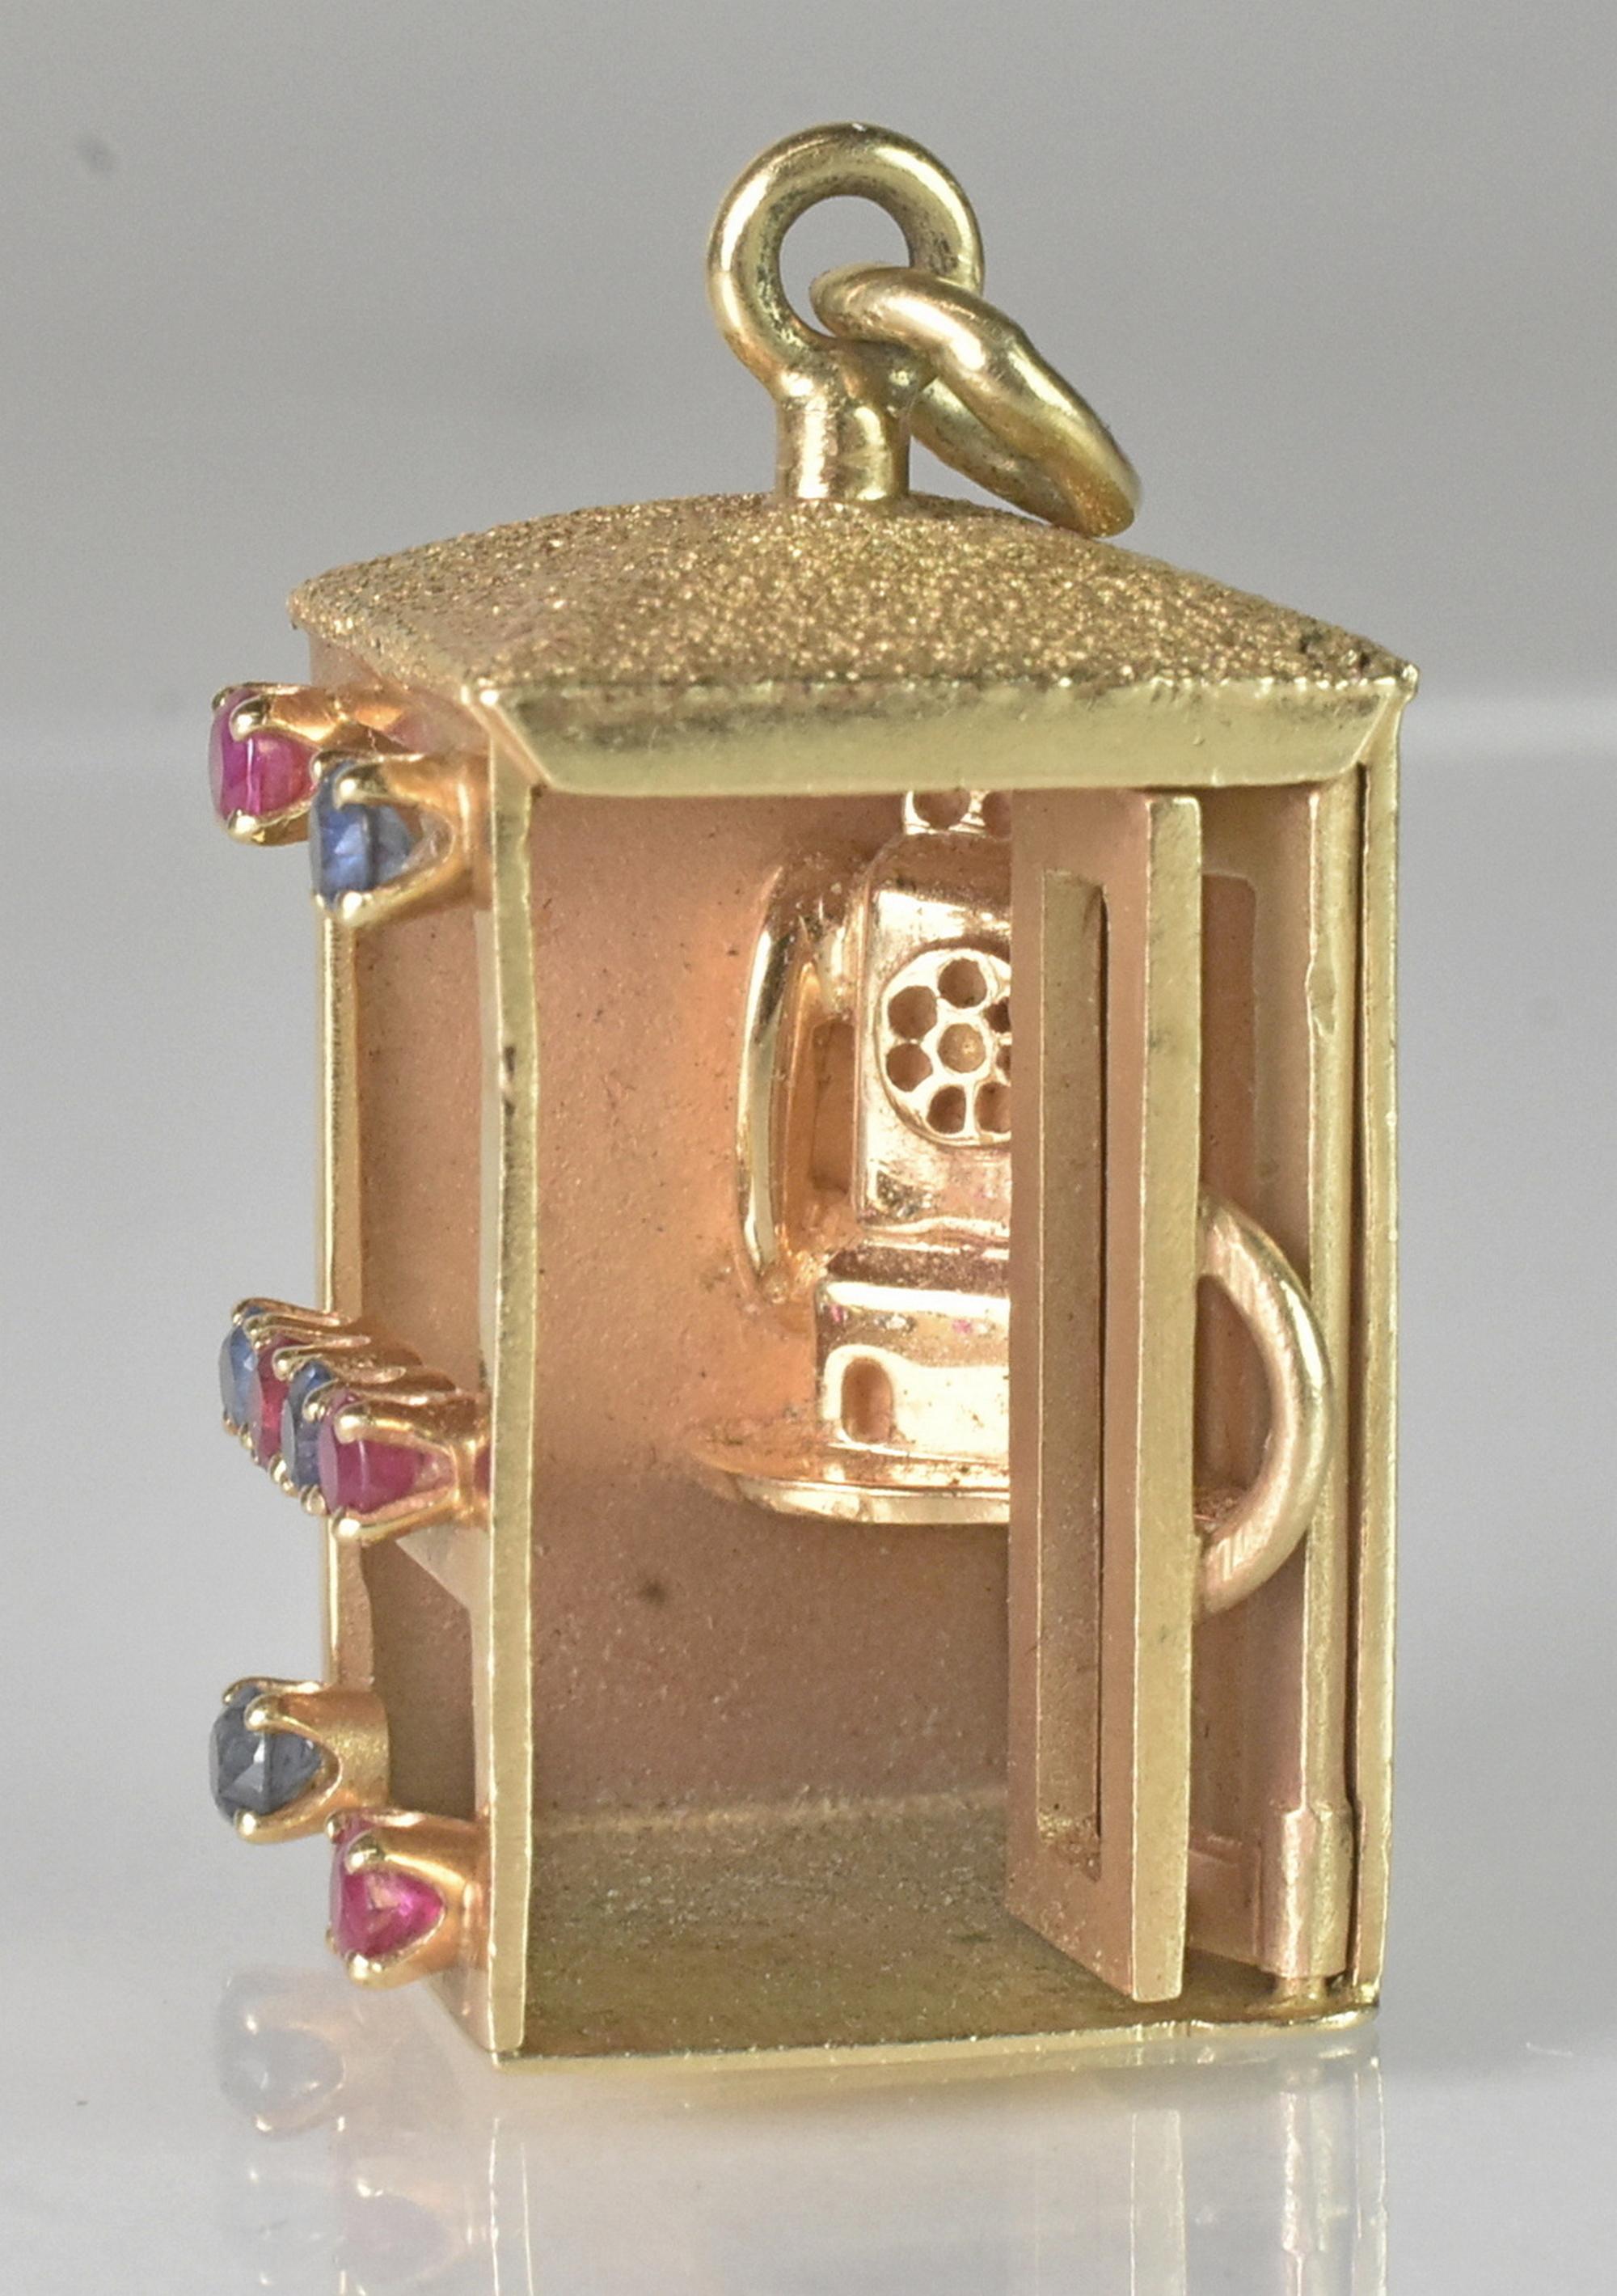 20th Century 14k Gold Phonebooth Charm Pendant with Gems by Dankner For Sale